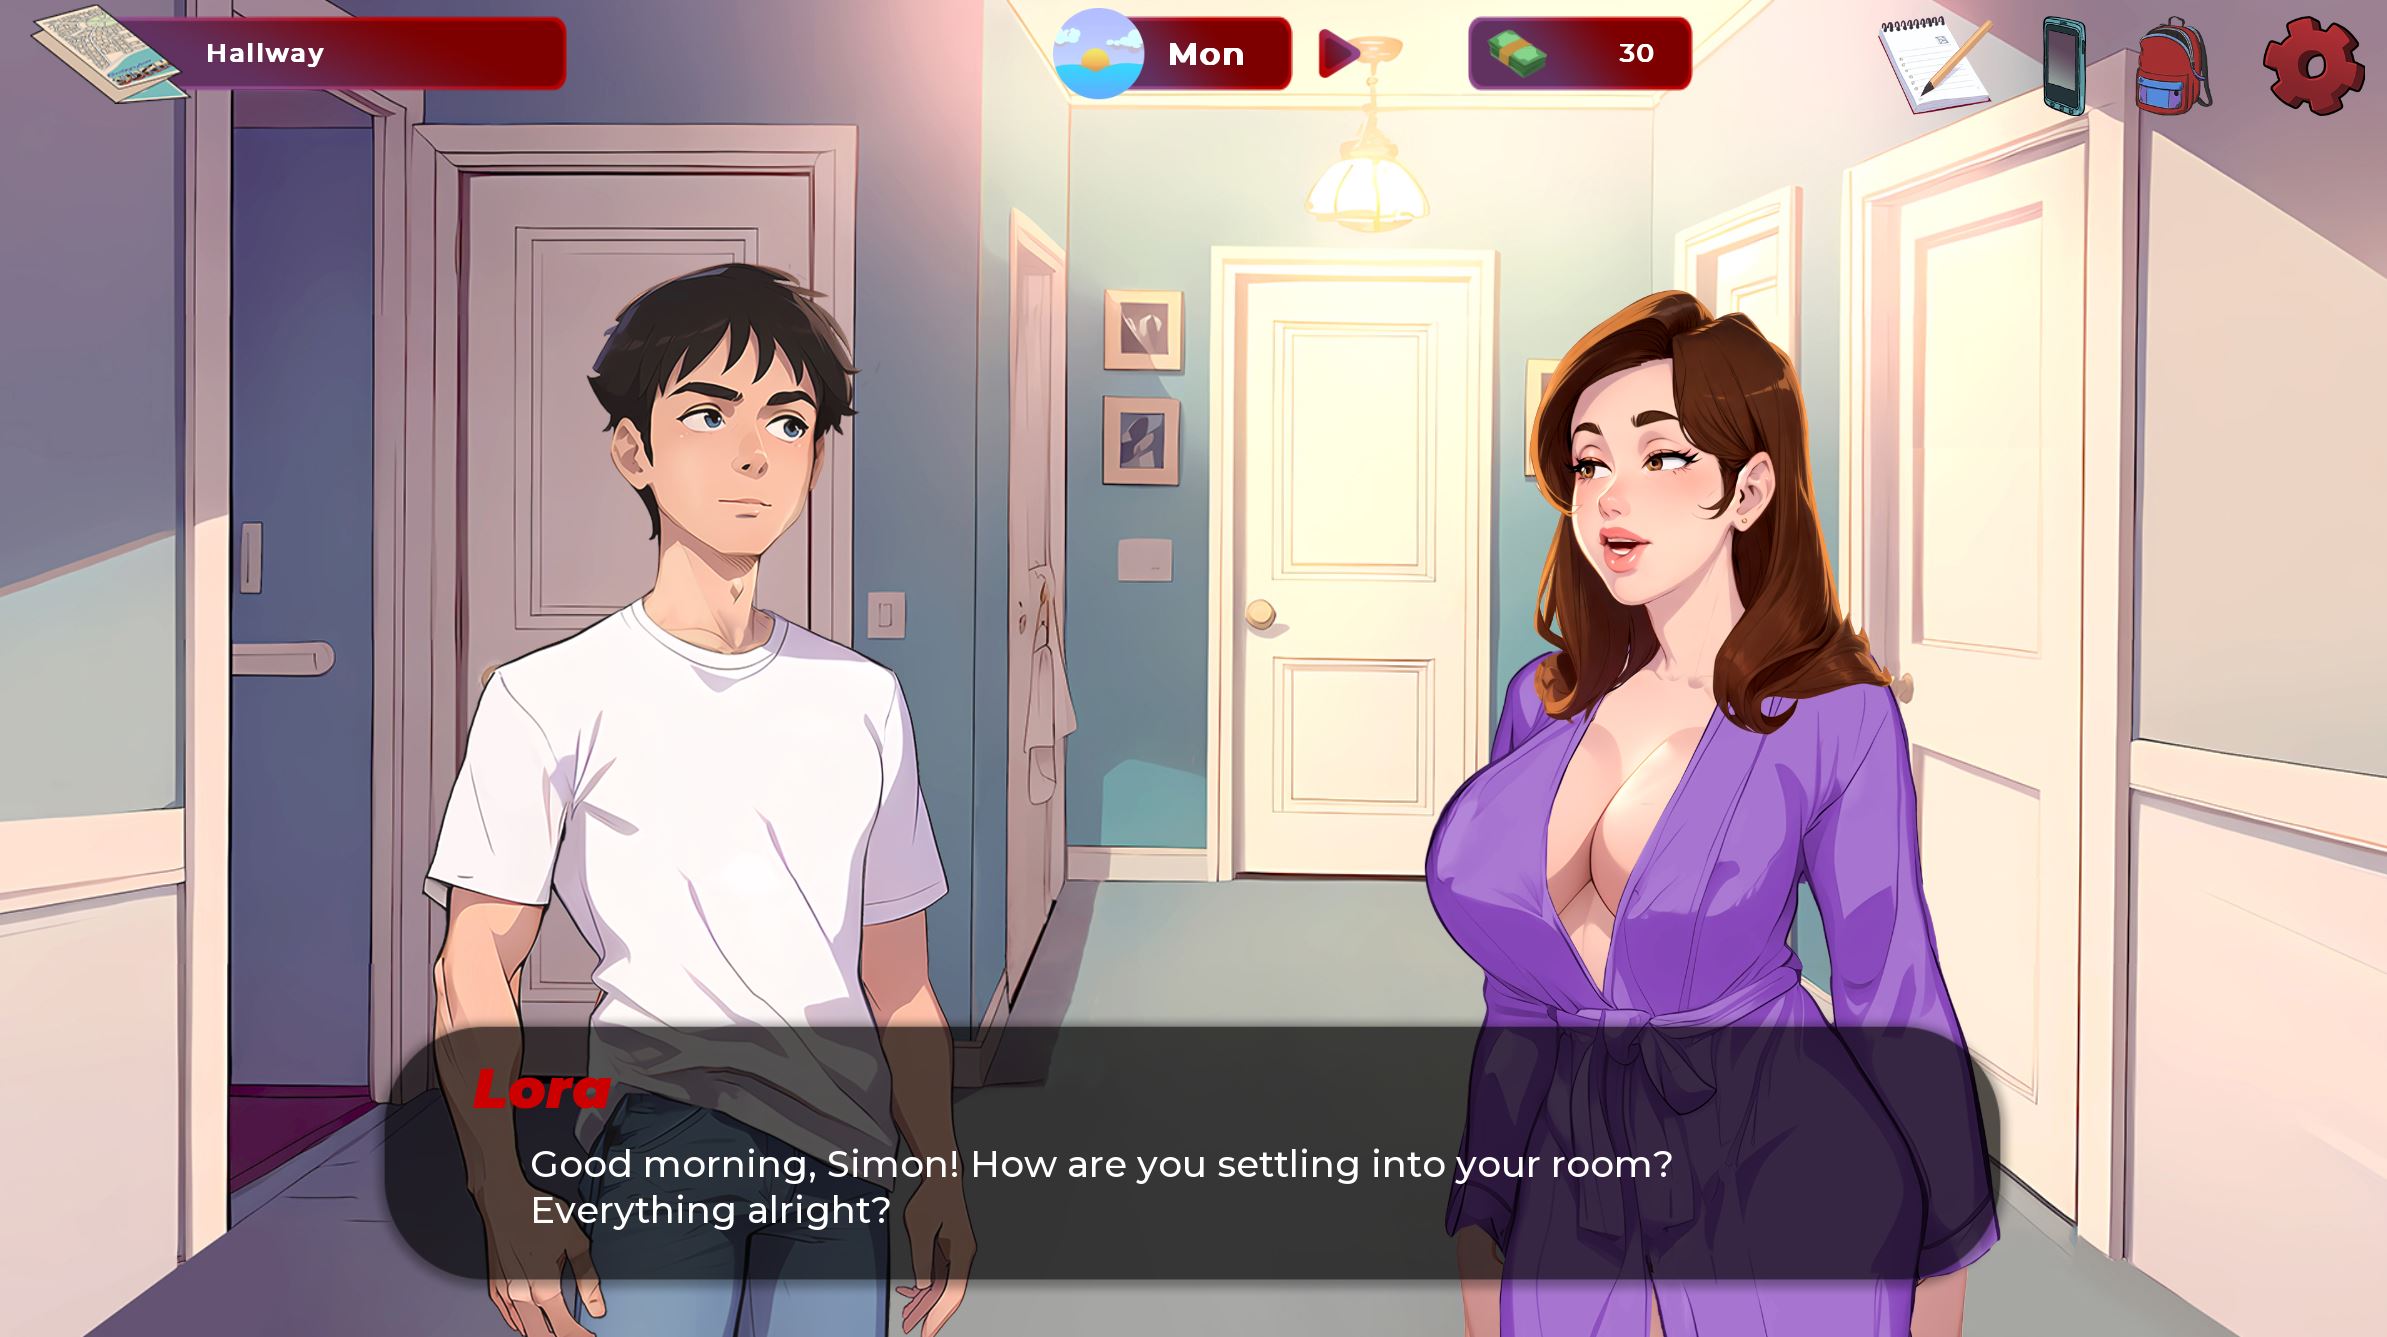 Sex Video Apk Download - Red Brim Ren'Py Porn Sex Game v.0.9a Download for Windows, MacOS, Linux,  Android